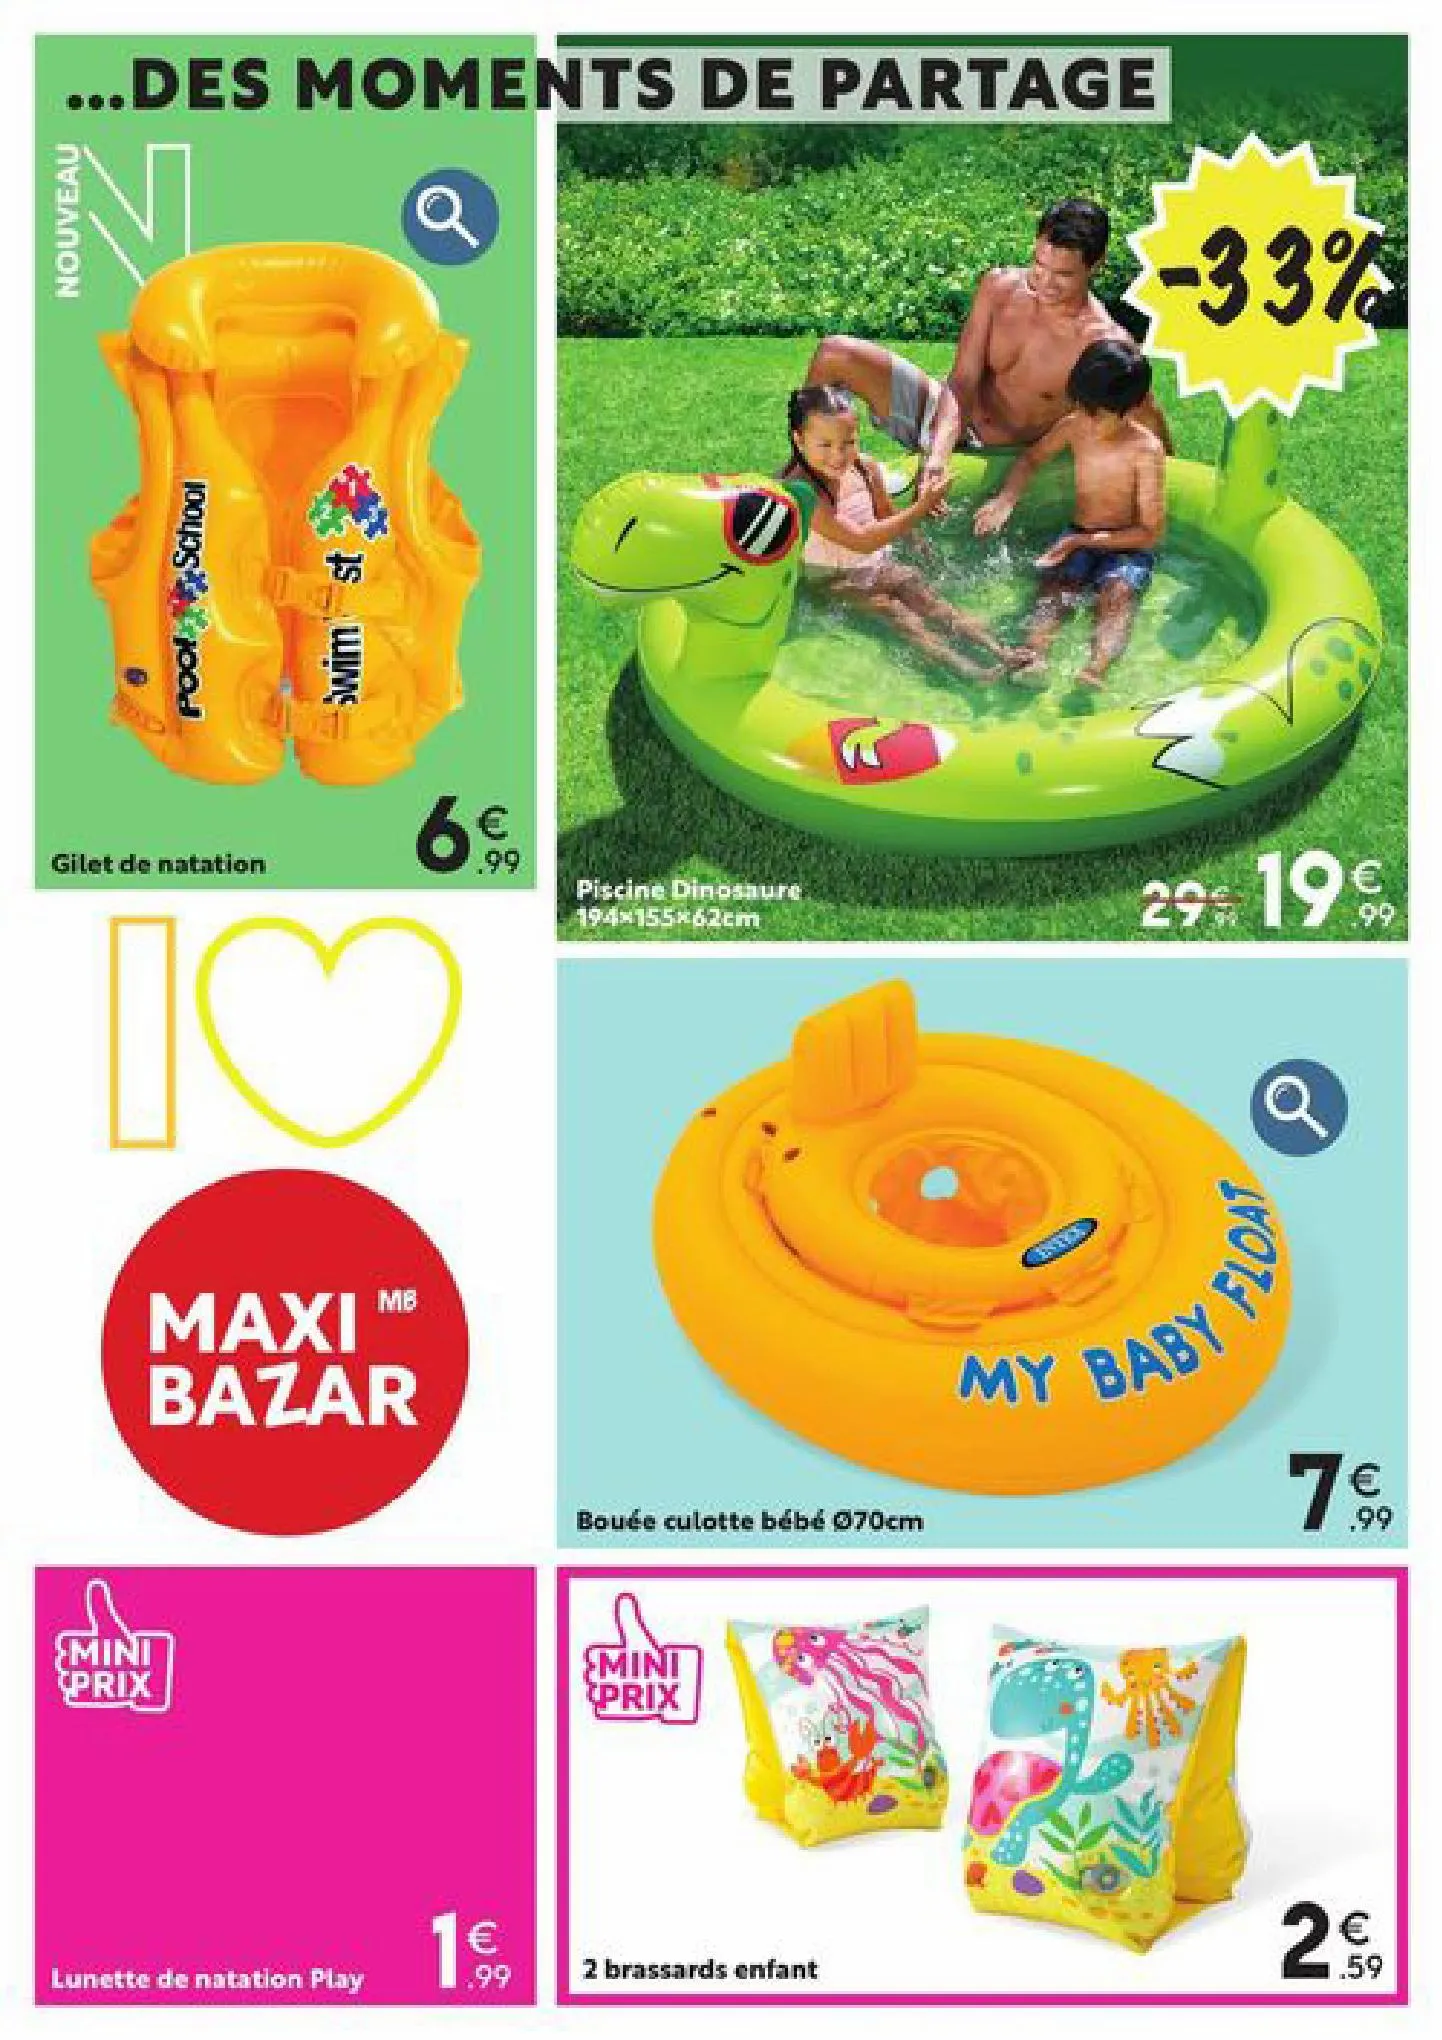 Catalogue DYA Shopping offres, page 00009